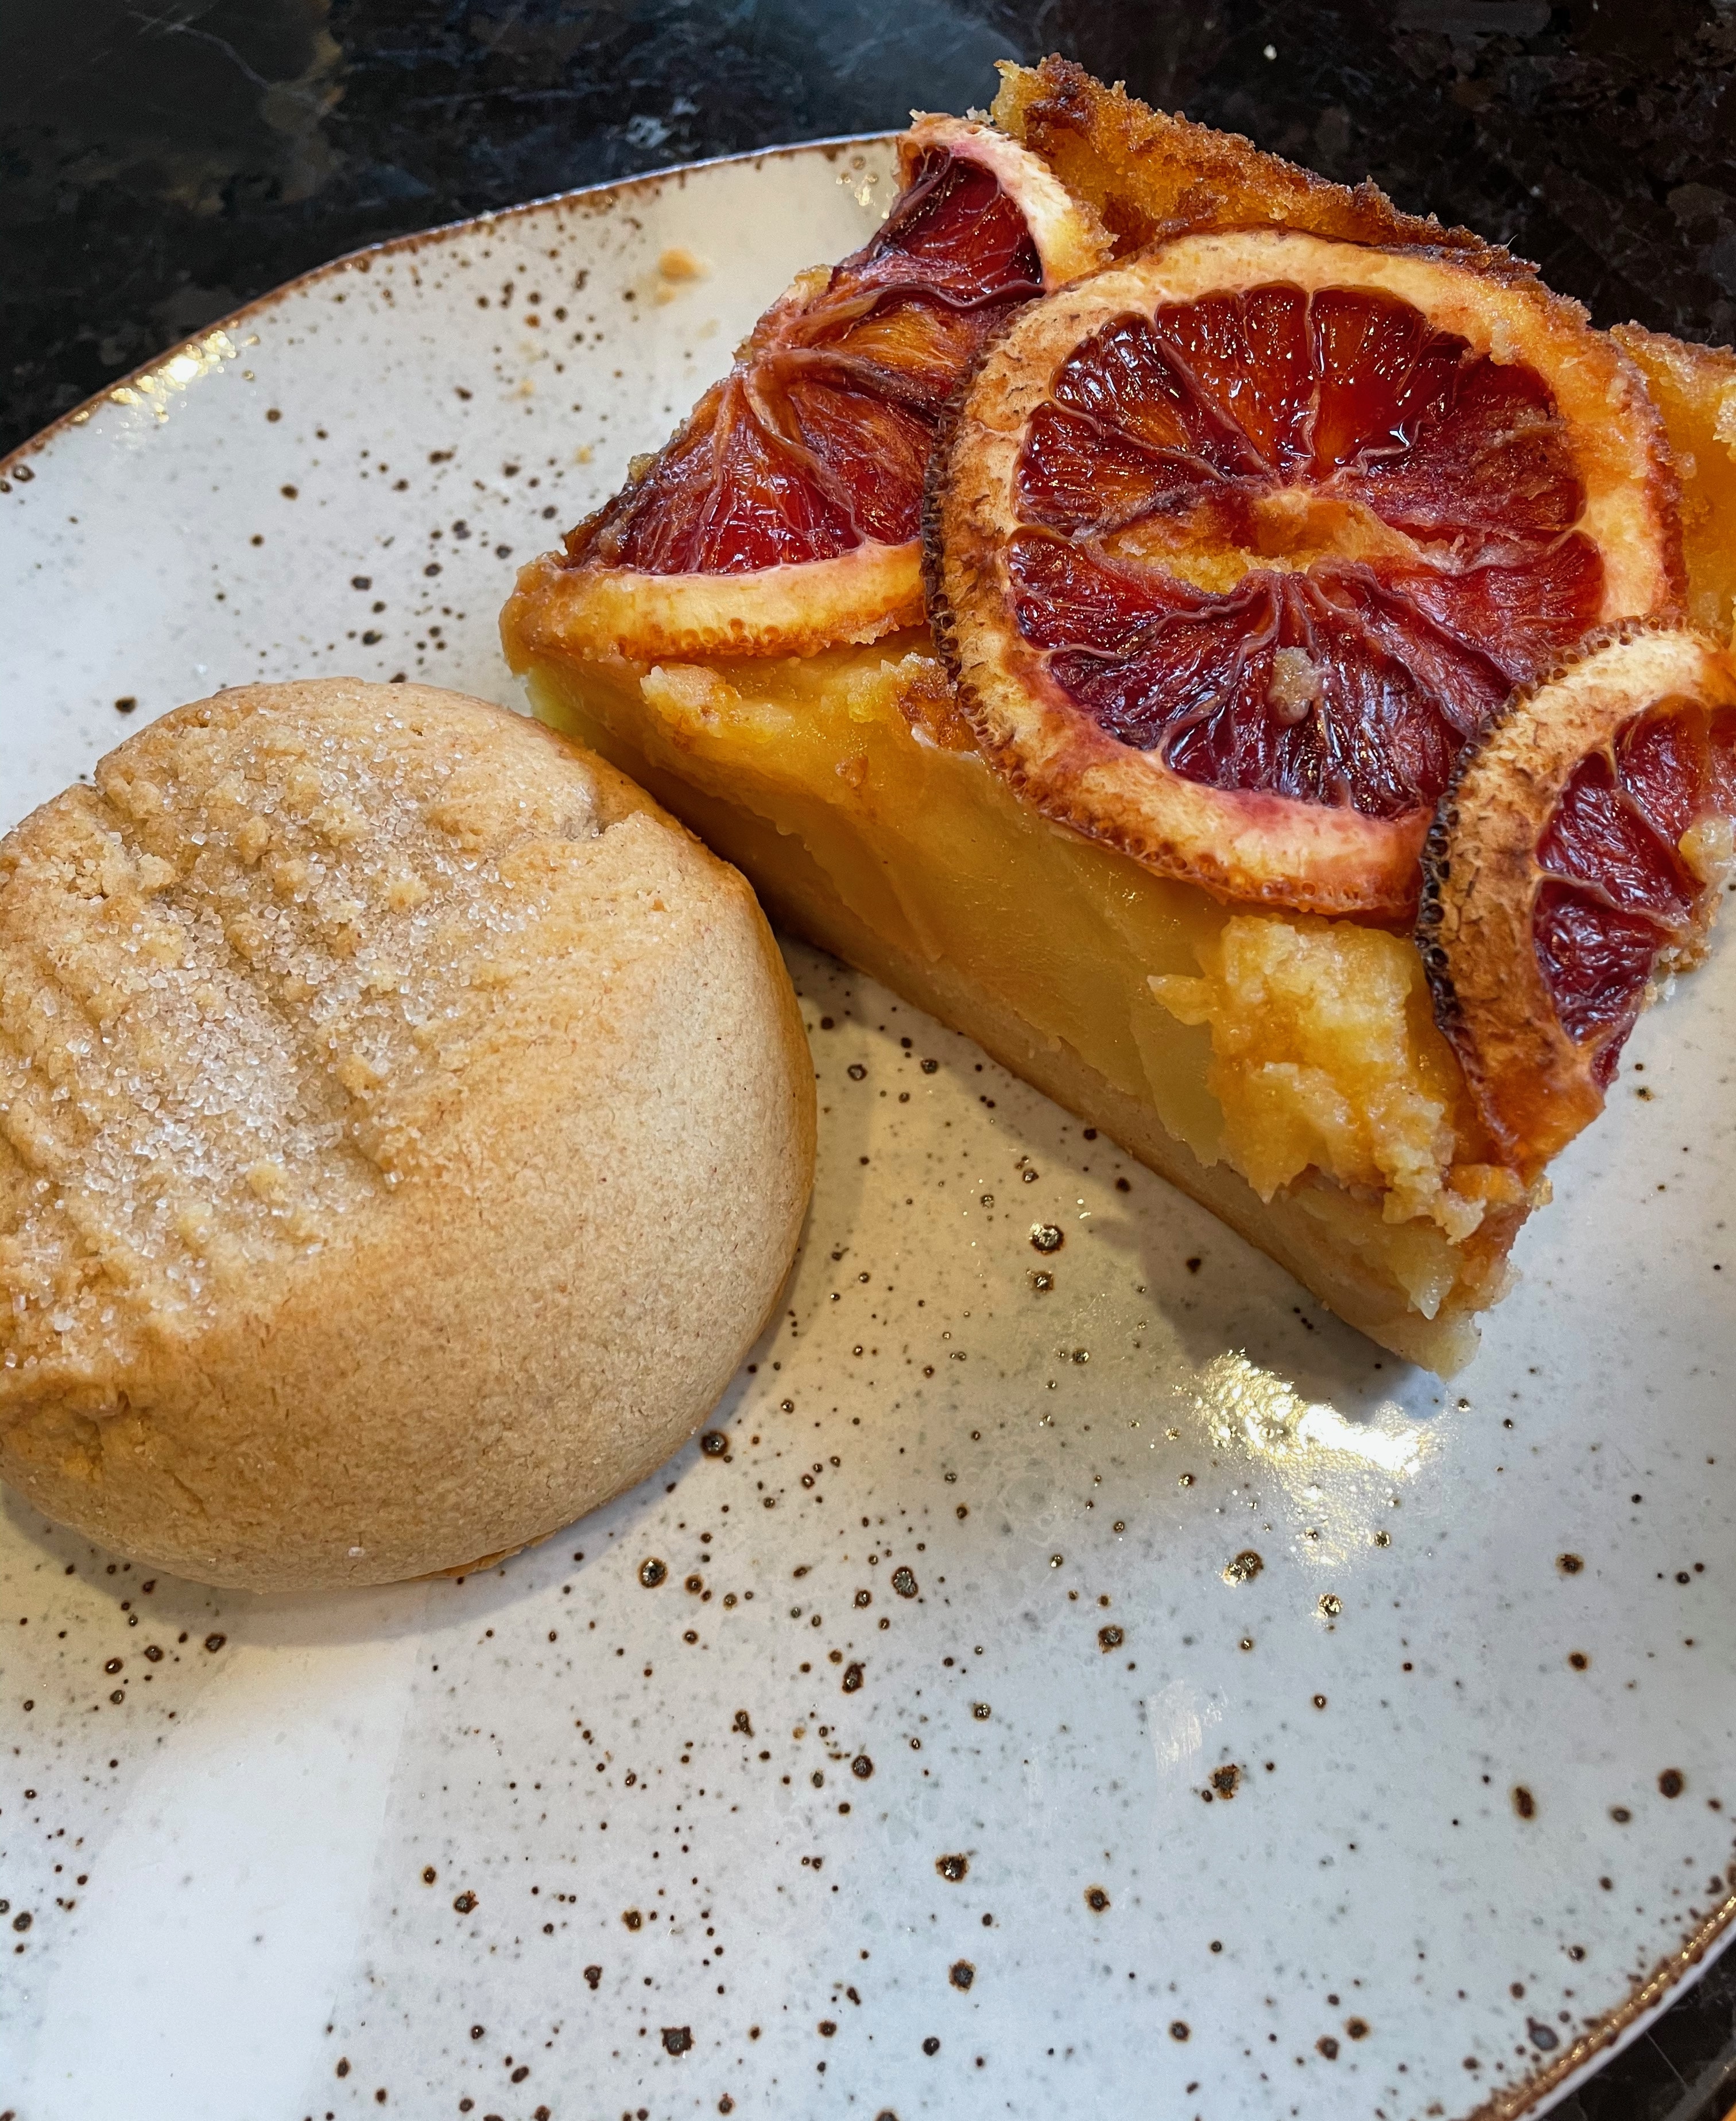 Lemon Tart with Blood Orange and a Peanut Butter Cookie